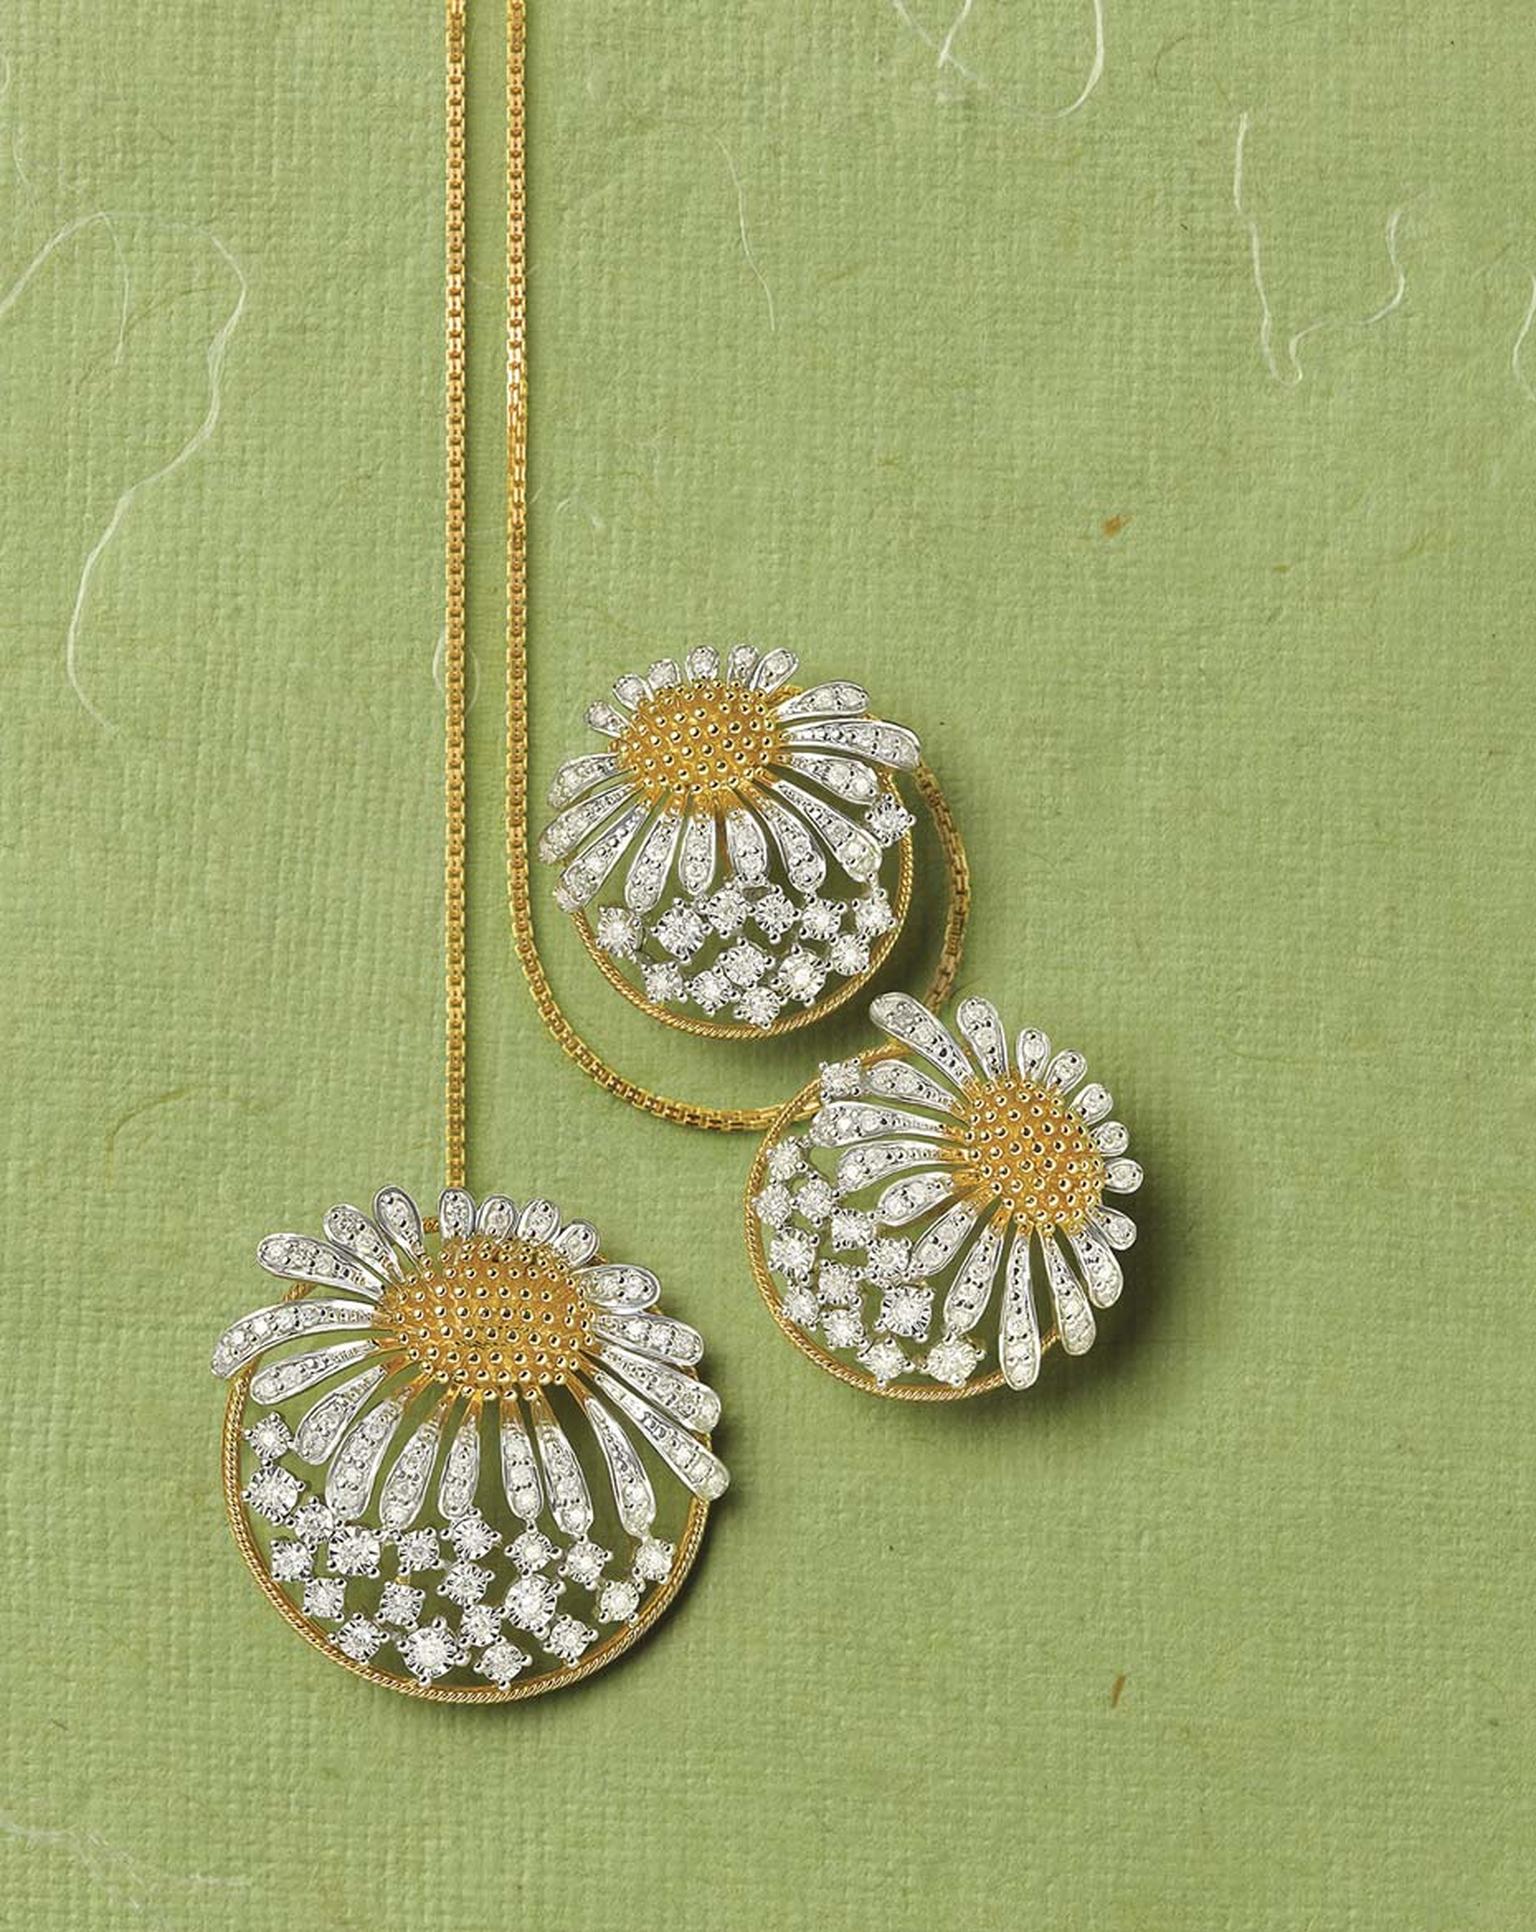 Tanishq Zyra collection white and yellow gold sunflower earrings and necklace studded with white diamonds.